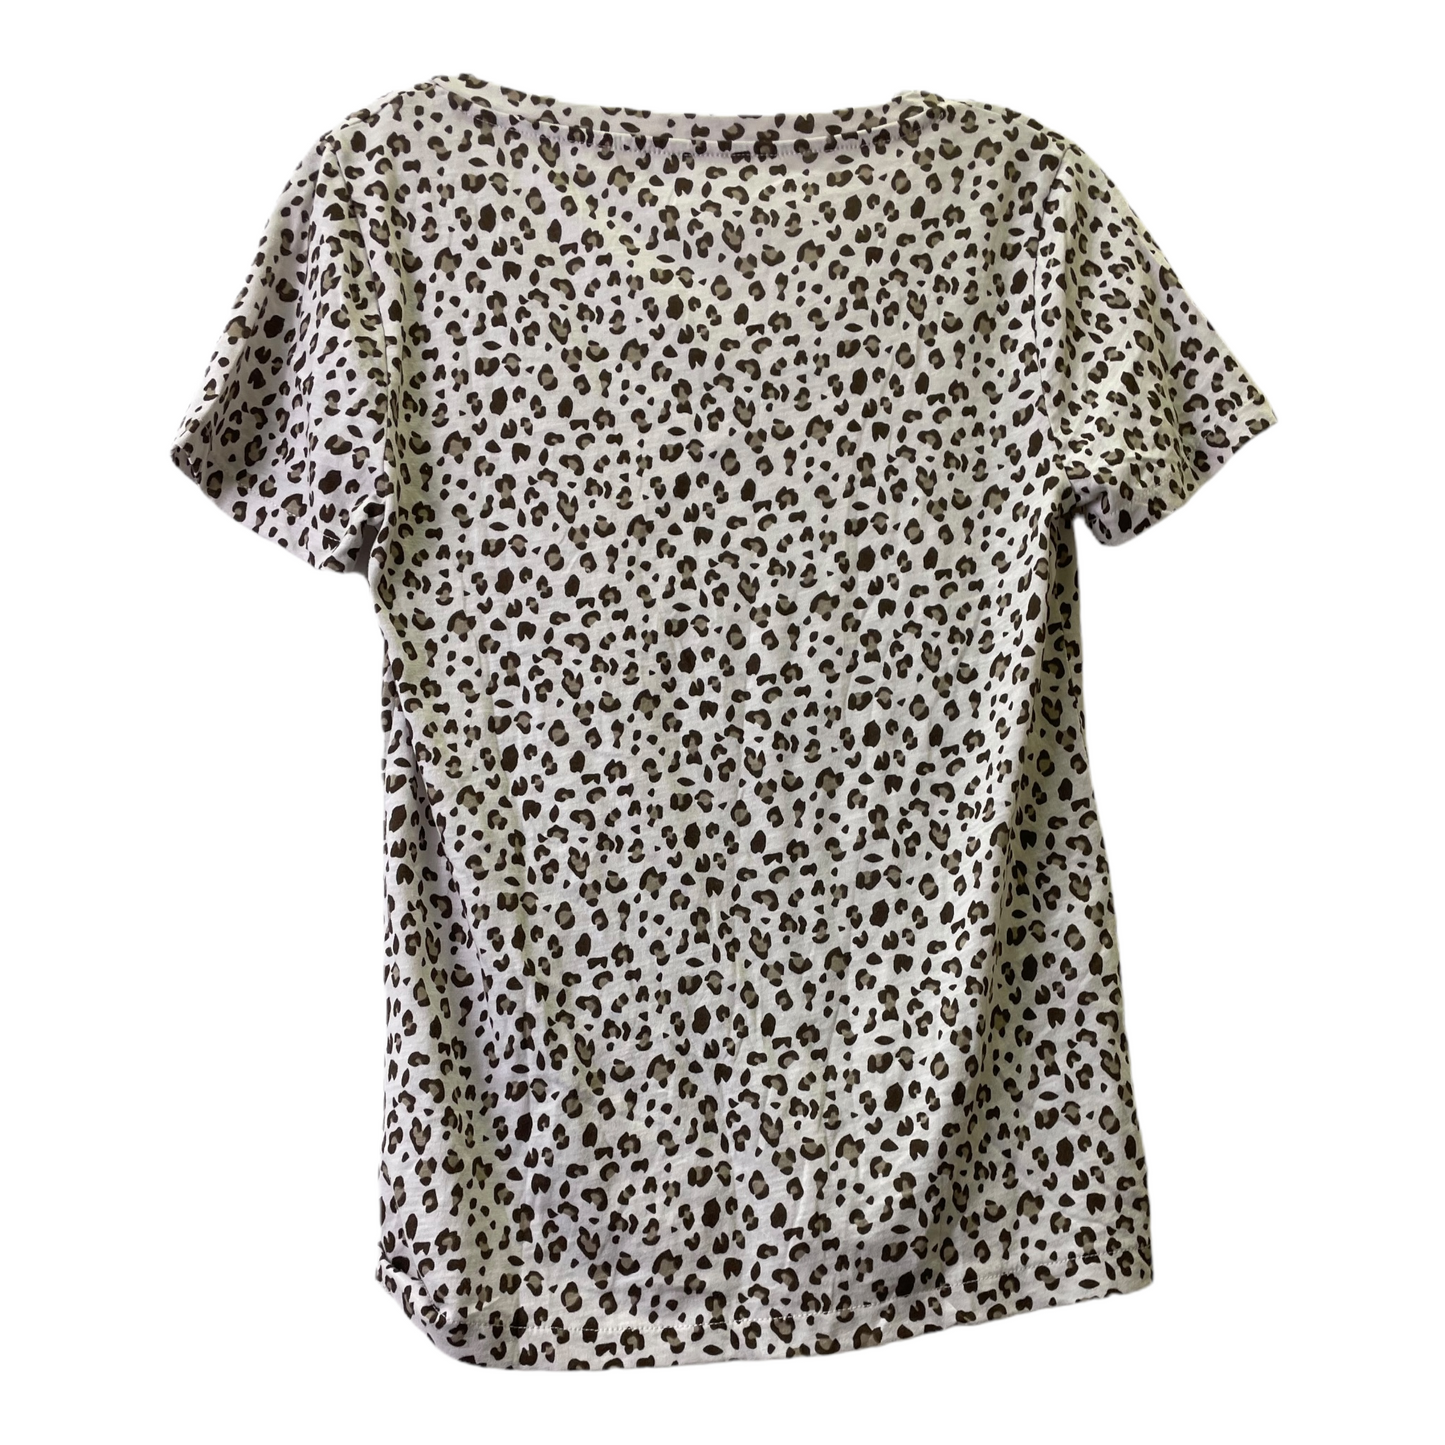 Leopard Print Top Short Sleeve Basic By J. Crew, Size: S